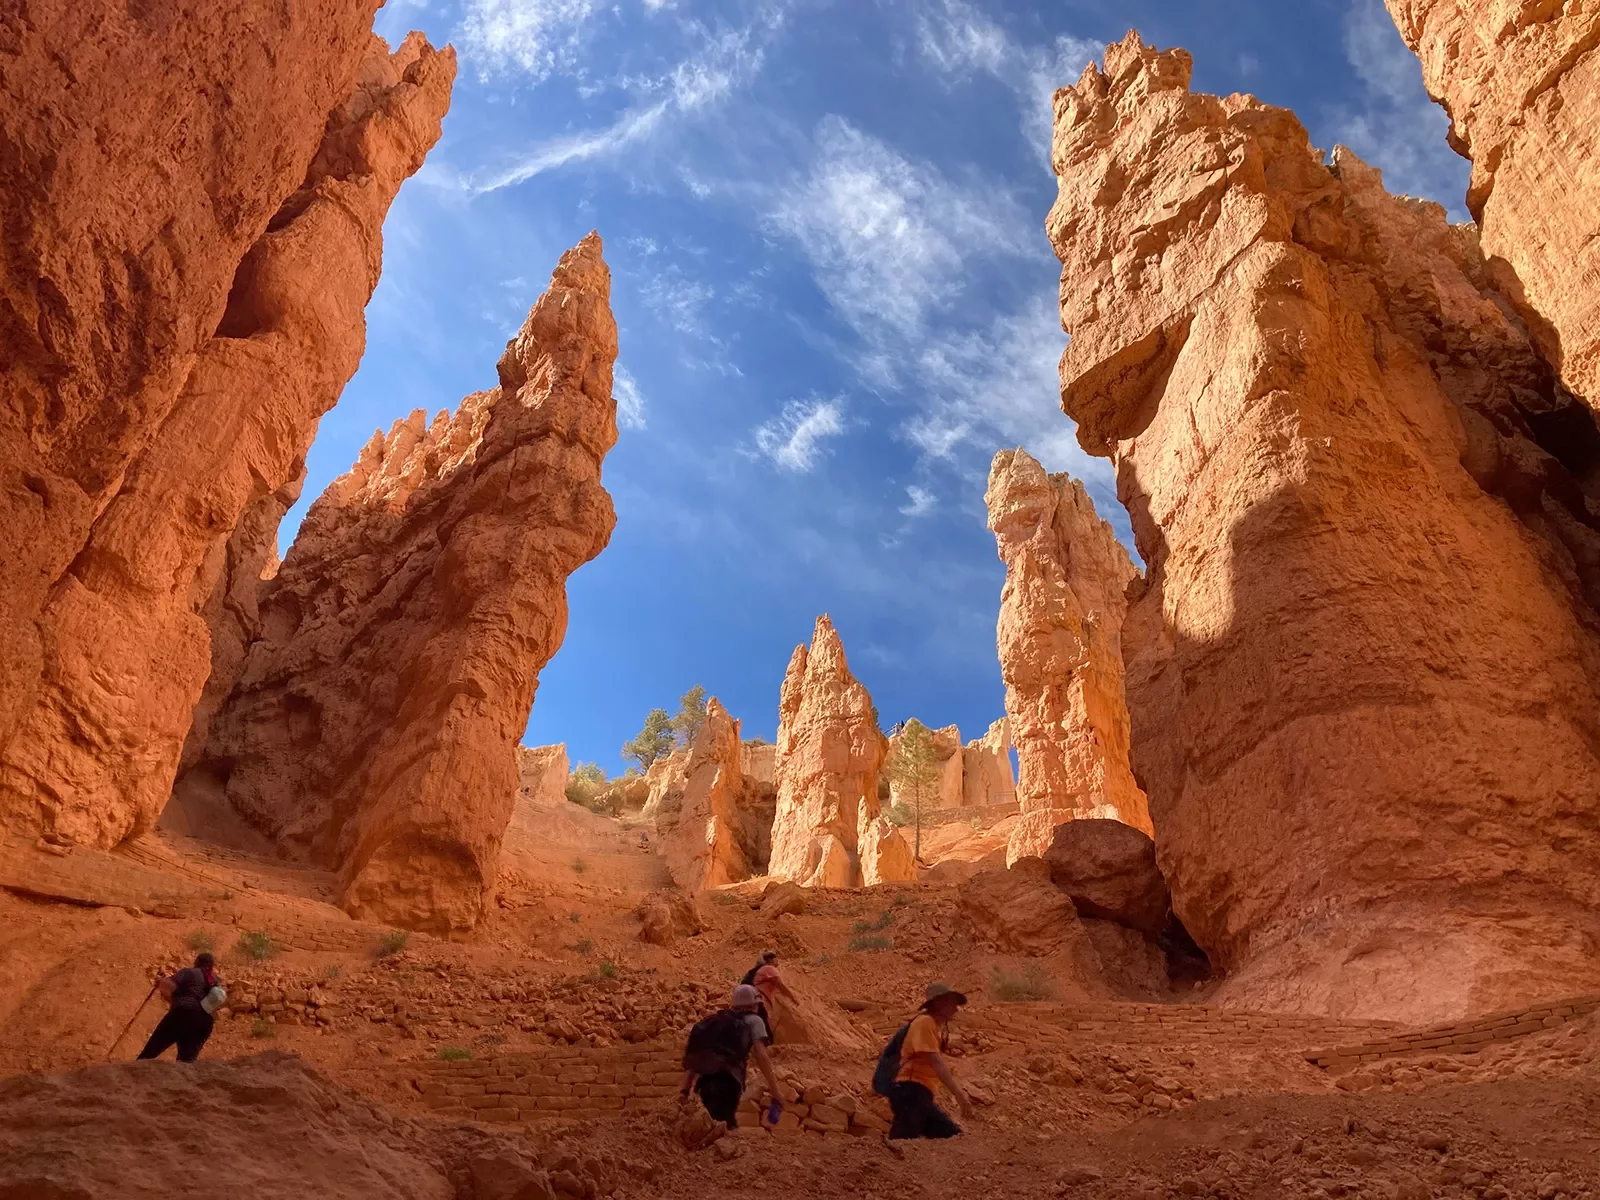 Guests hiking among hoodoos, camera pointed to sky.